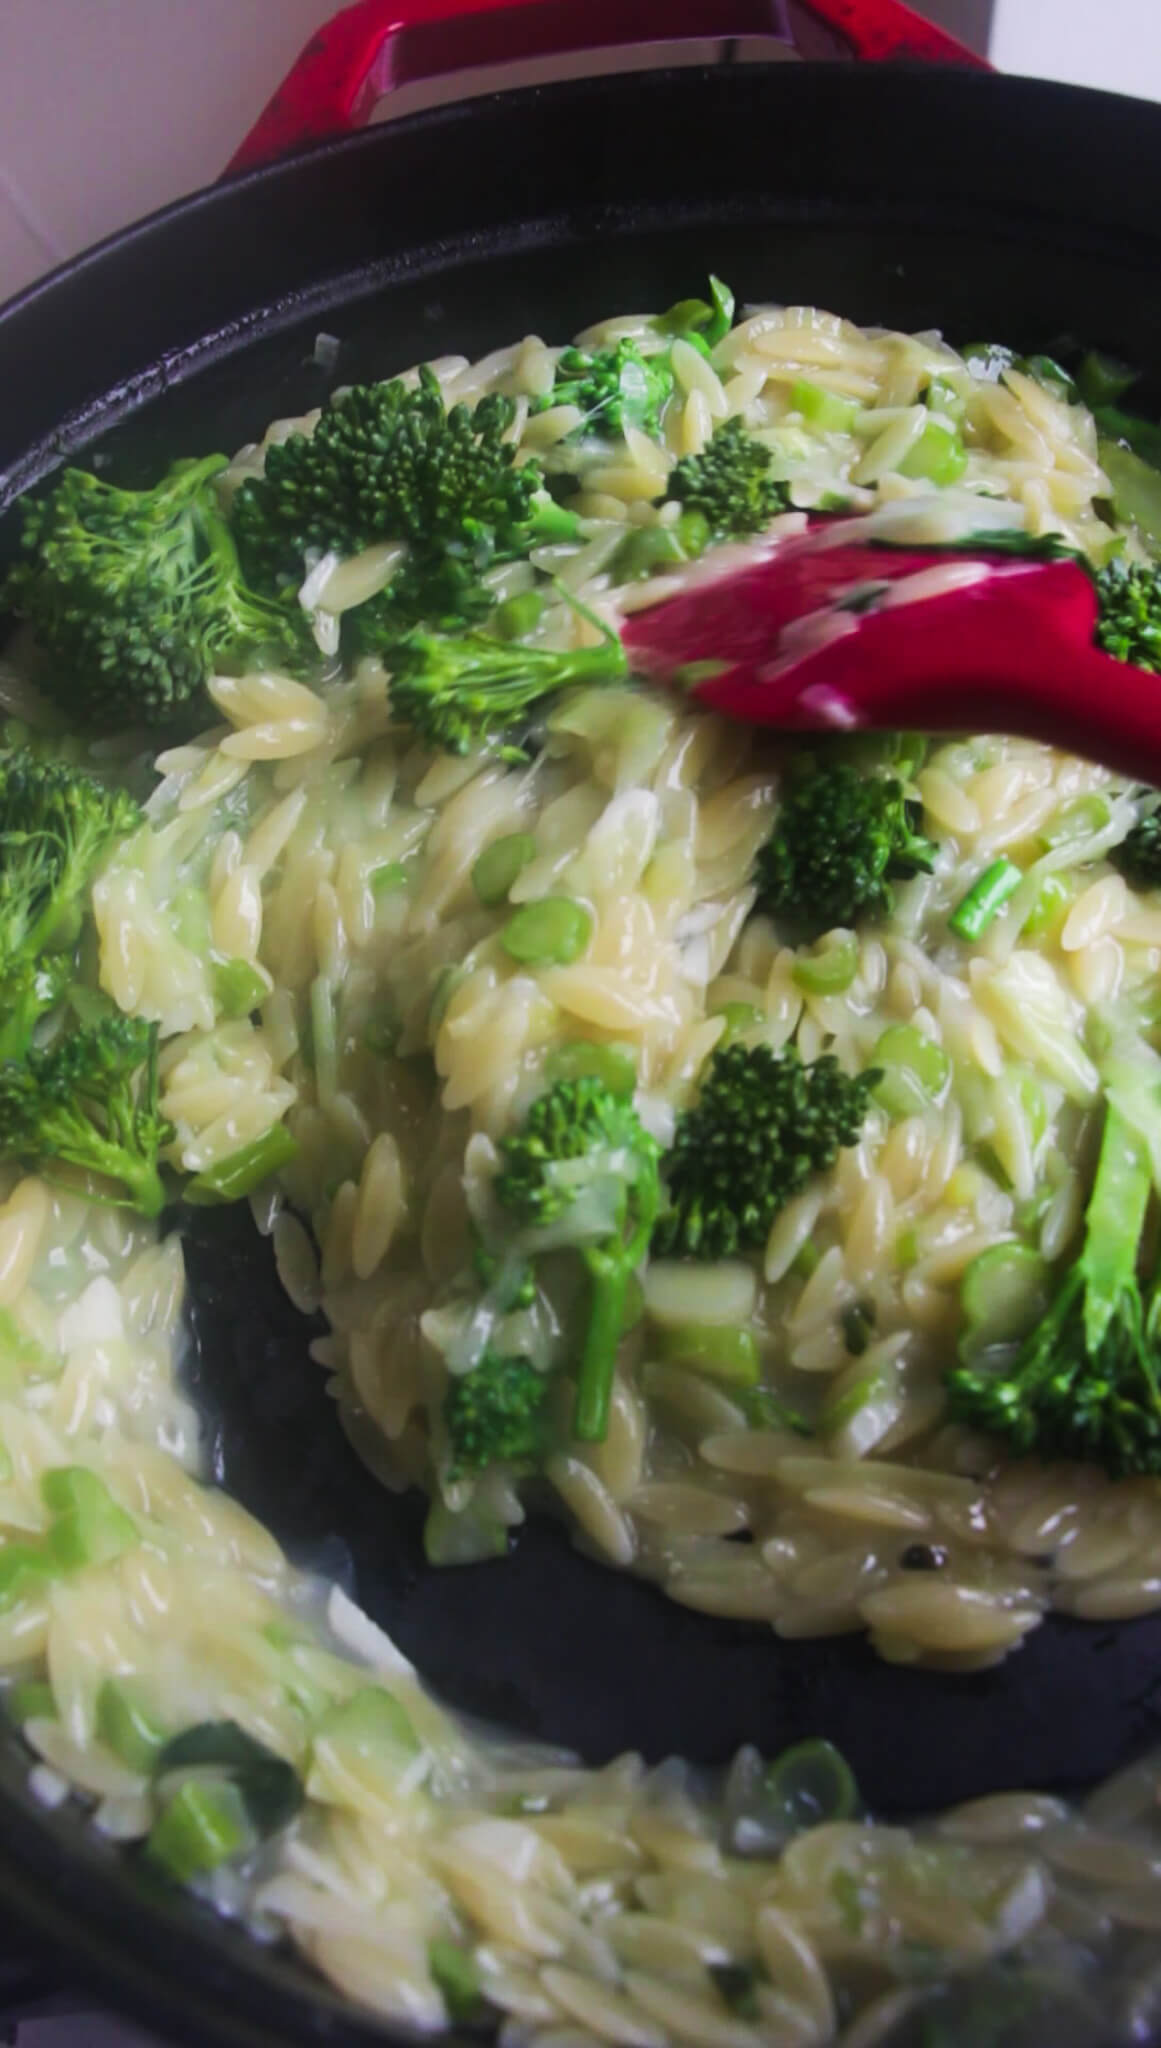 Red spatula folding broccolini into creamy orzo in a red and black pan.